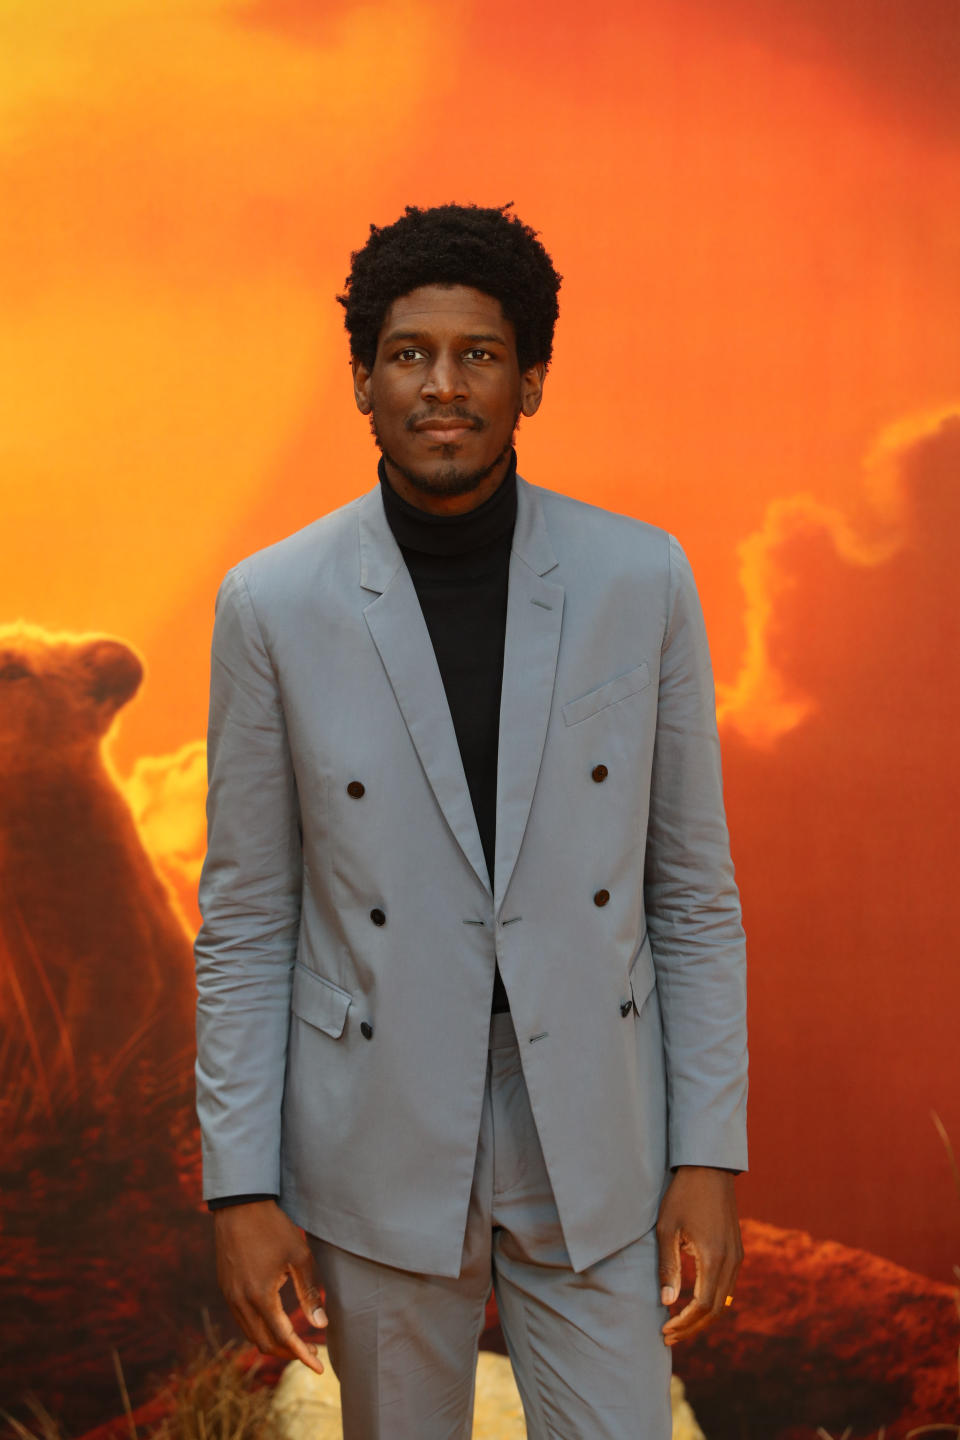 Labrinth attends the European Premiere of Disney's The Lion King at the Odeon Leicester Square, London.